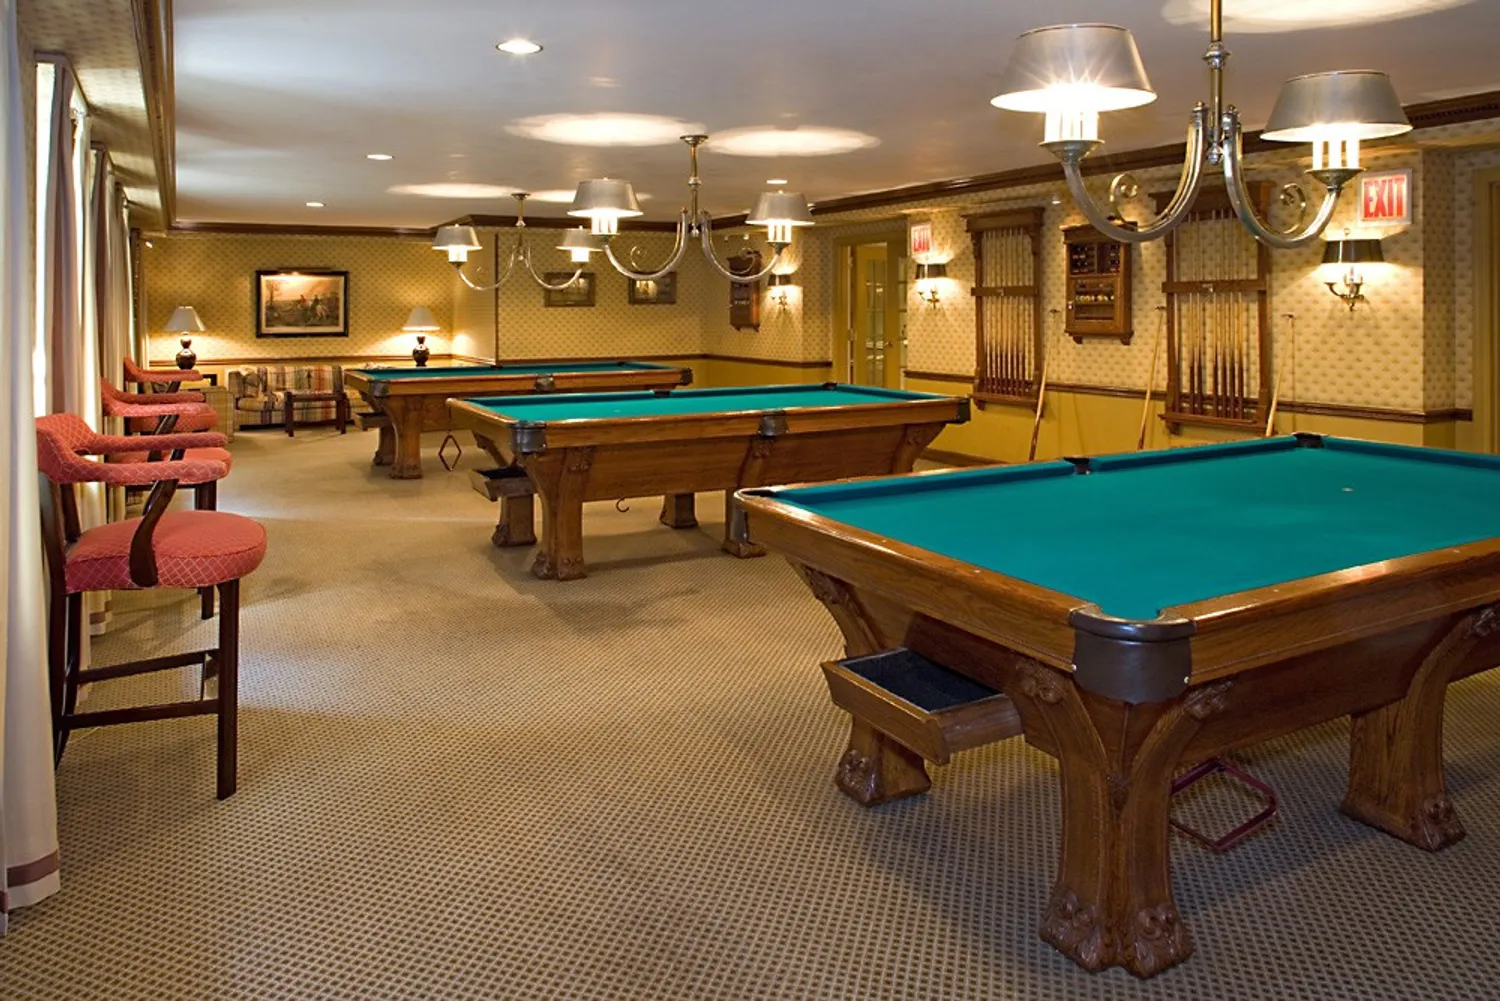 Billiards and card rooms perfect for lounging